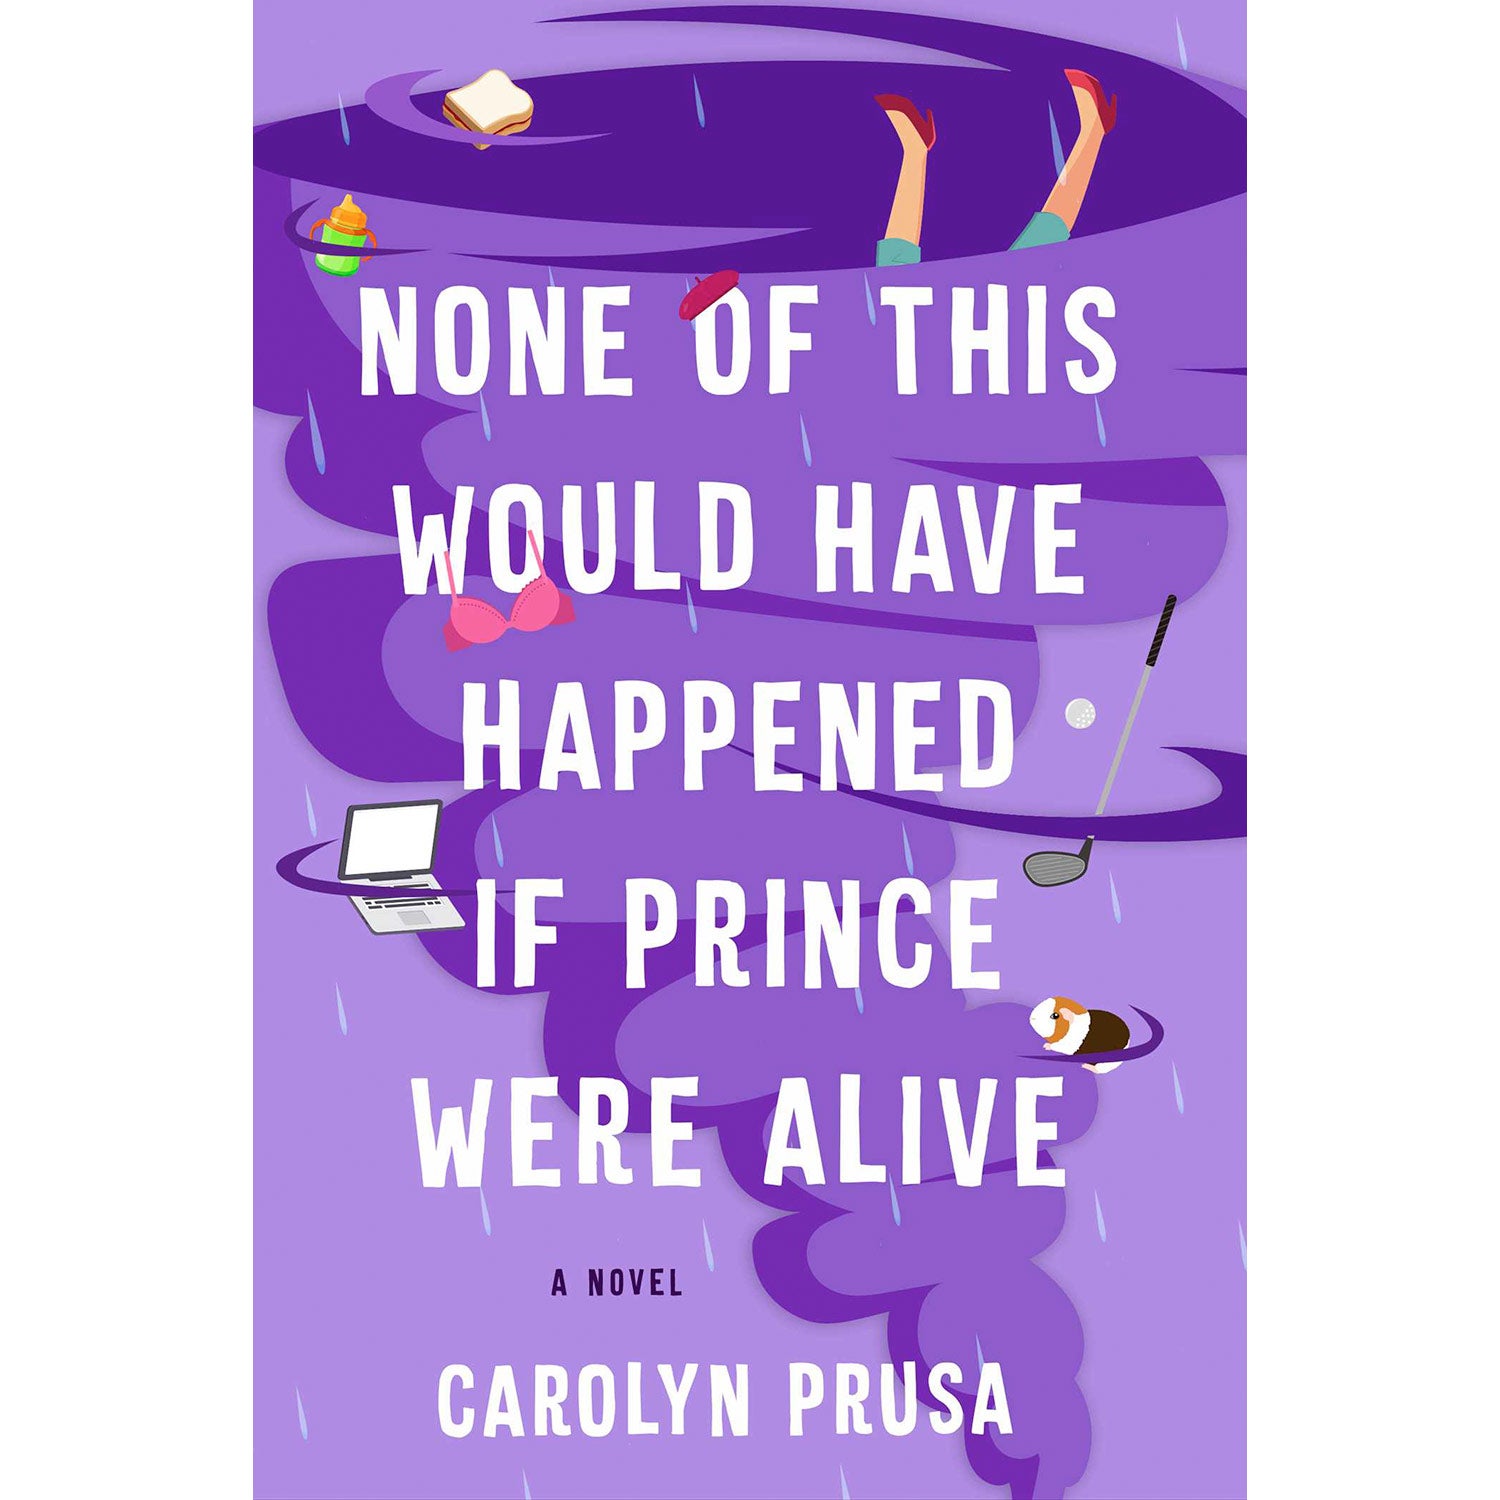 The cover of None of This Would Have Happened if Prince Were Alive.